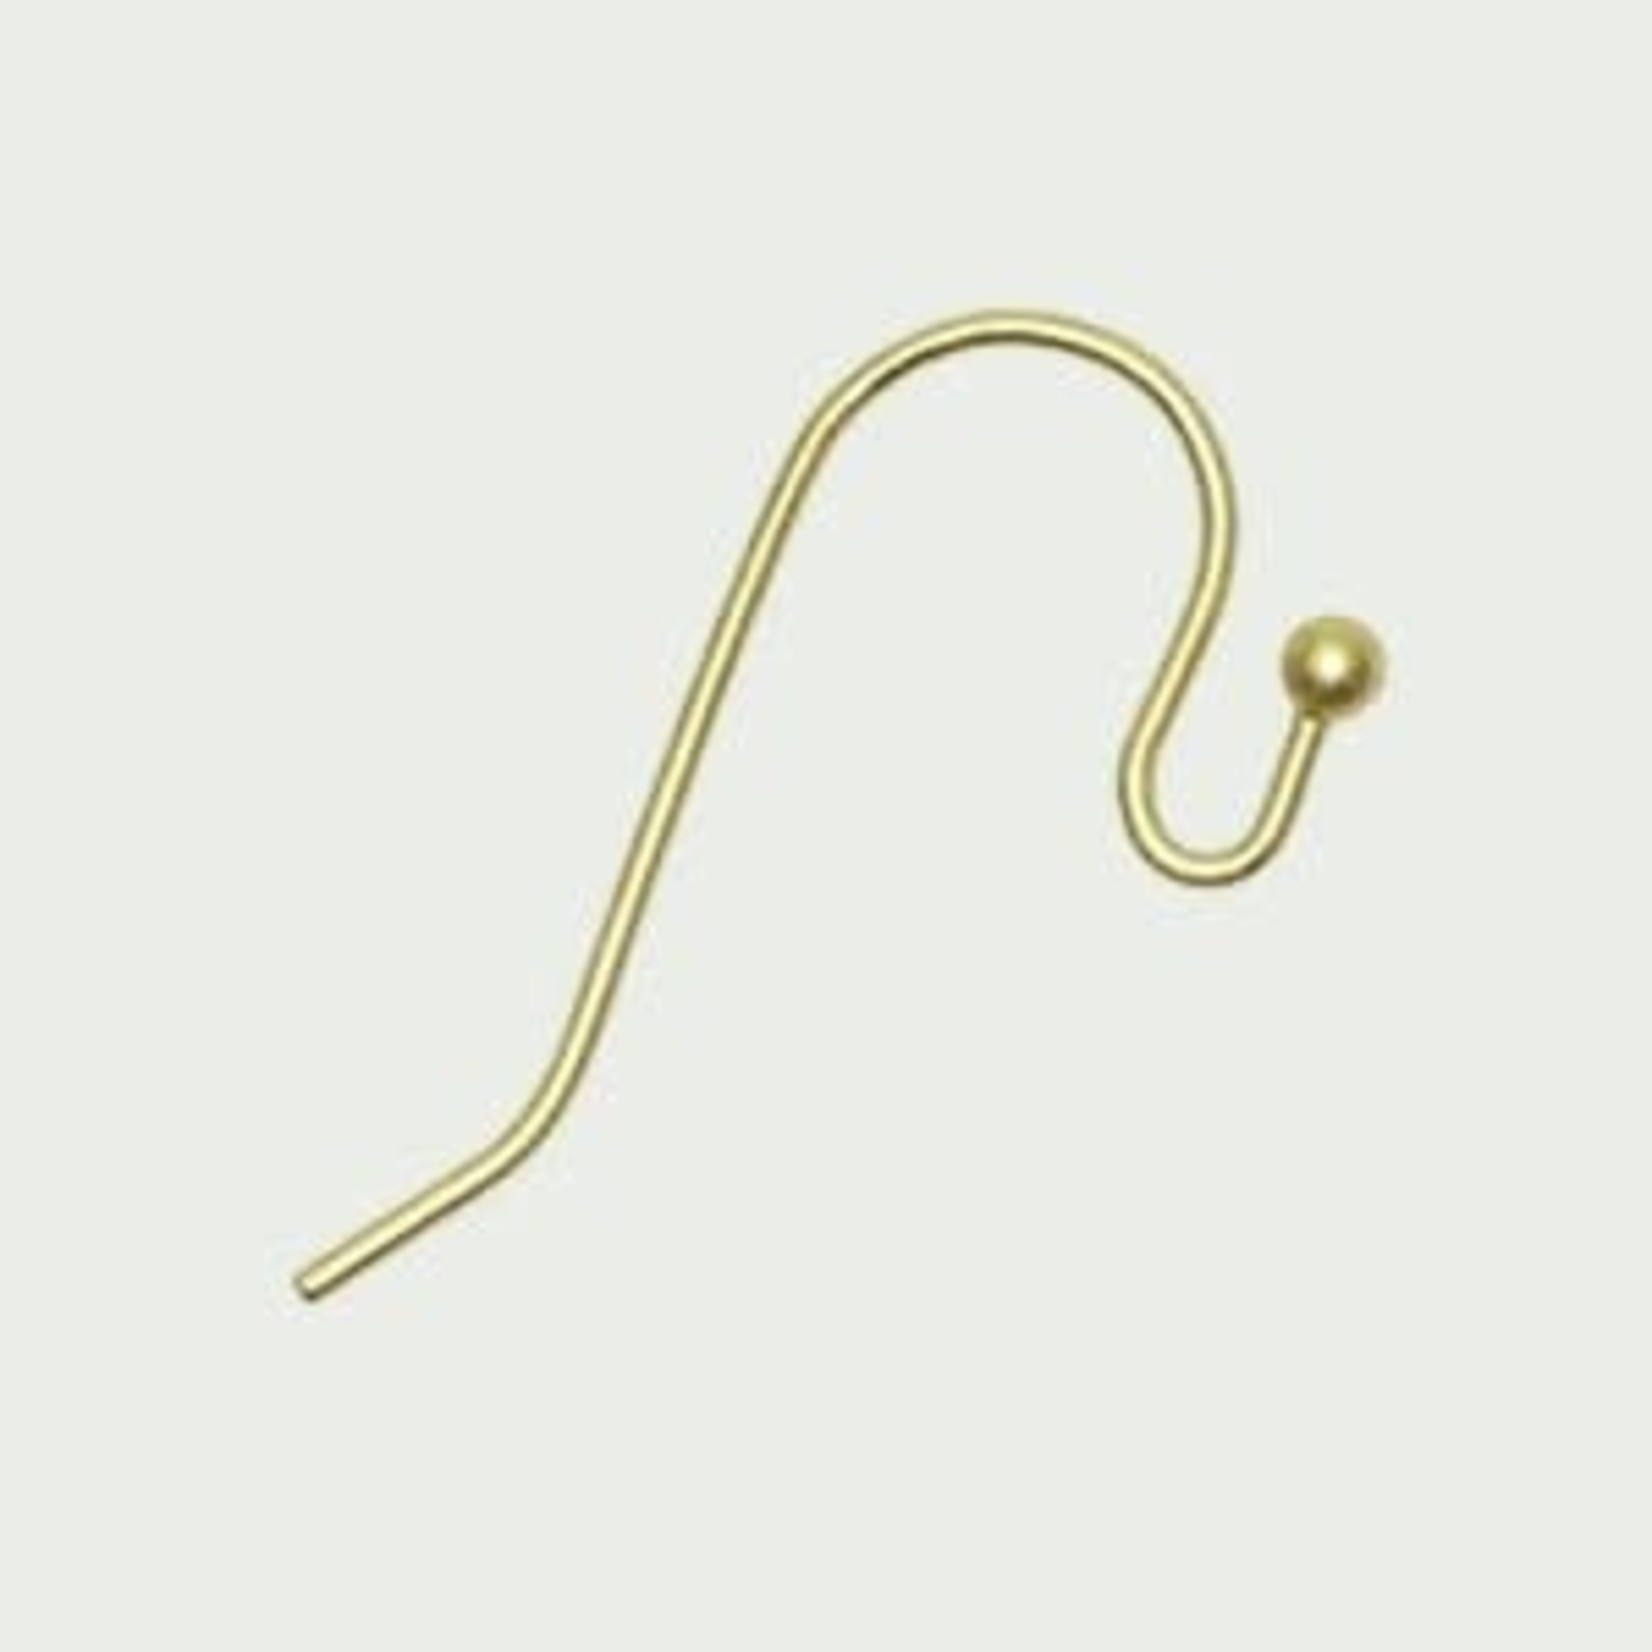 French Earwire Nickel-Free Satin Gold Plated - 50 pieces